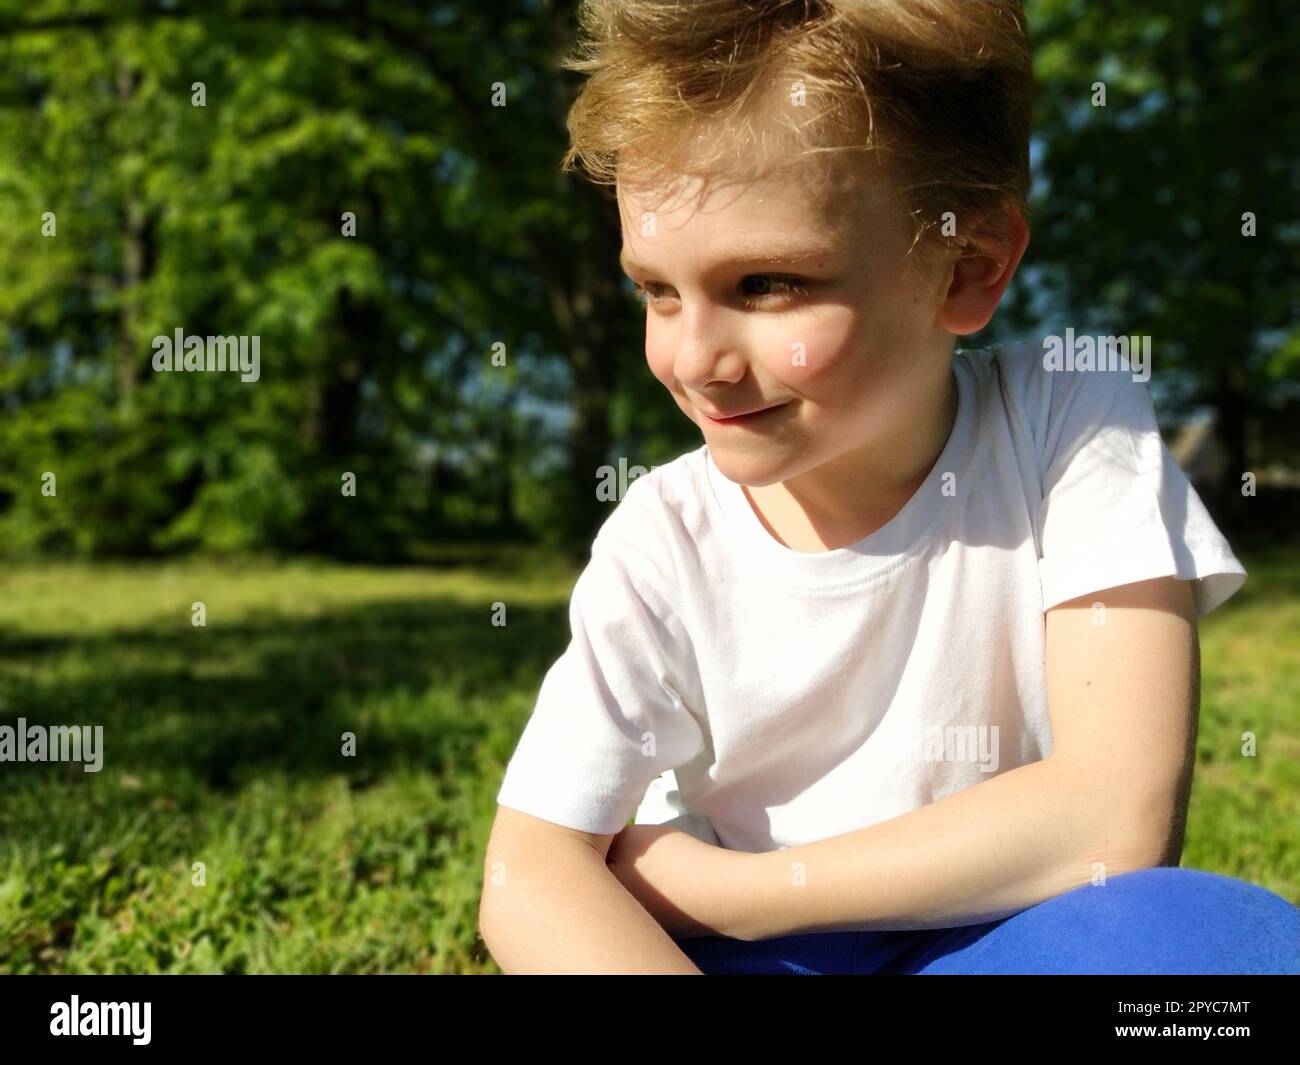 A cute young boy smiling and looks to the side. The child is dressed in a white T-shirt and blue pants. Blond hair is beautiful fall on the forehead. Long blonde eyelashes. Park in the background. Stock Photo